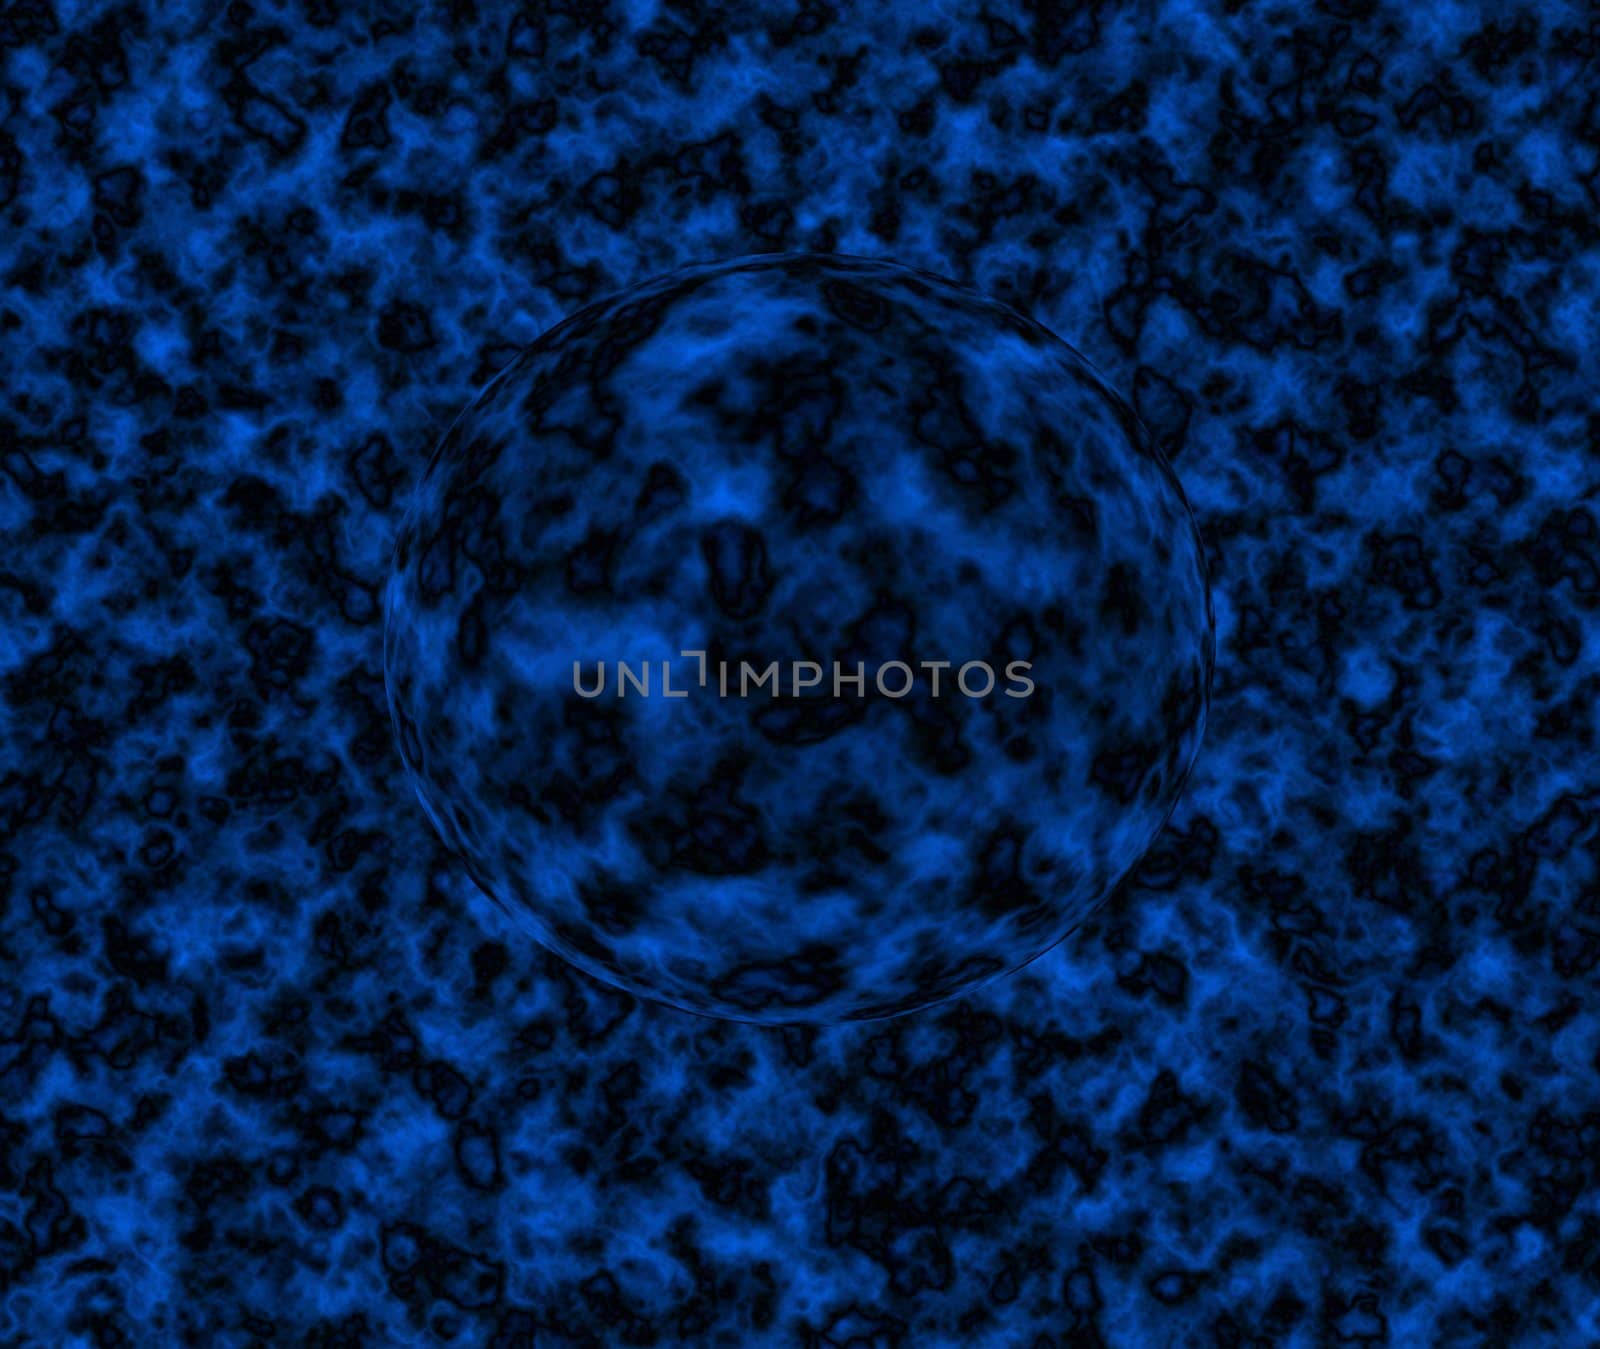 Image of dark and blue abstract background